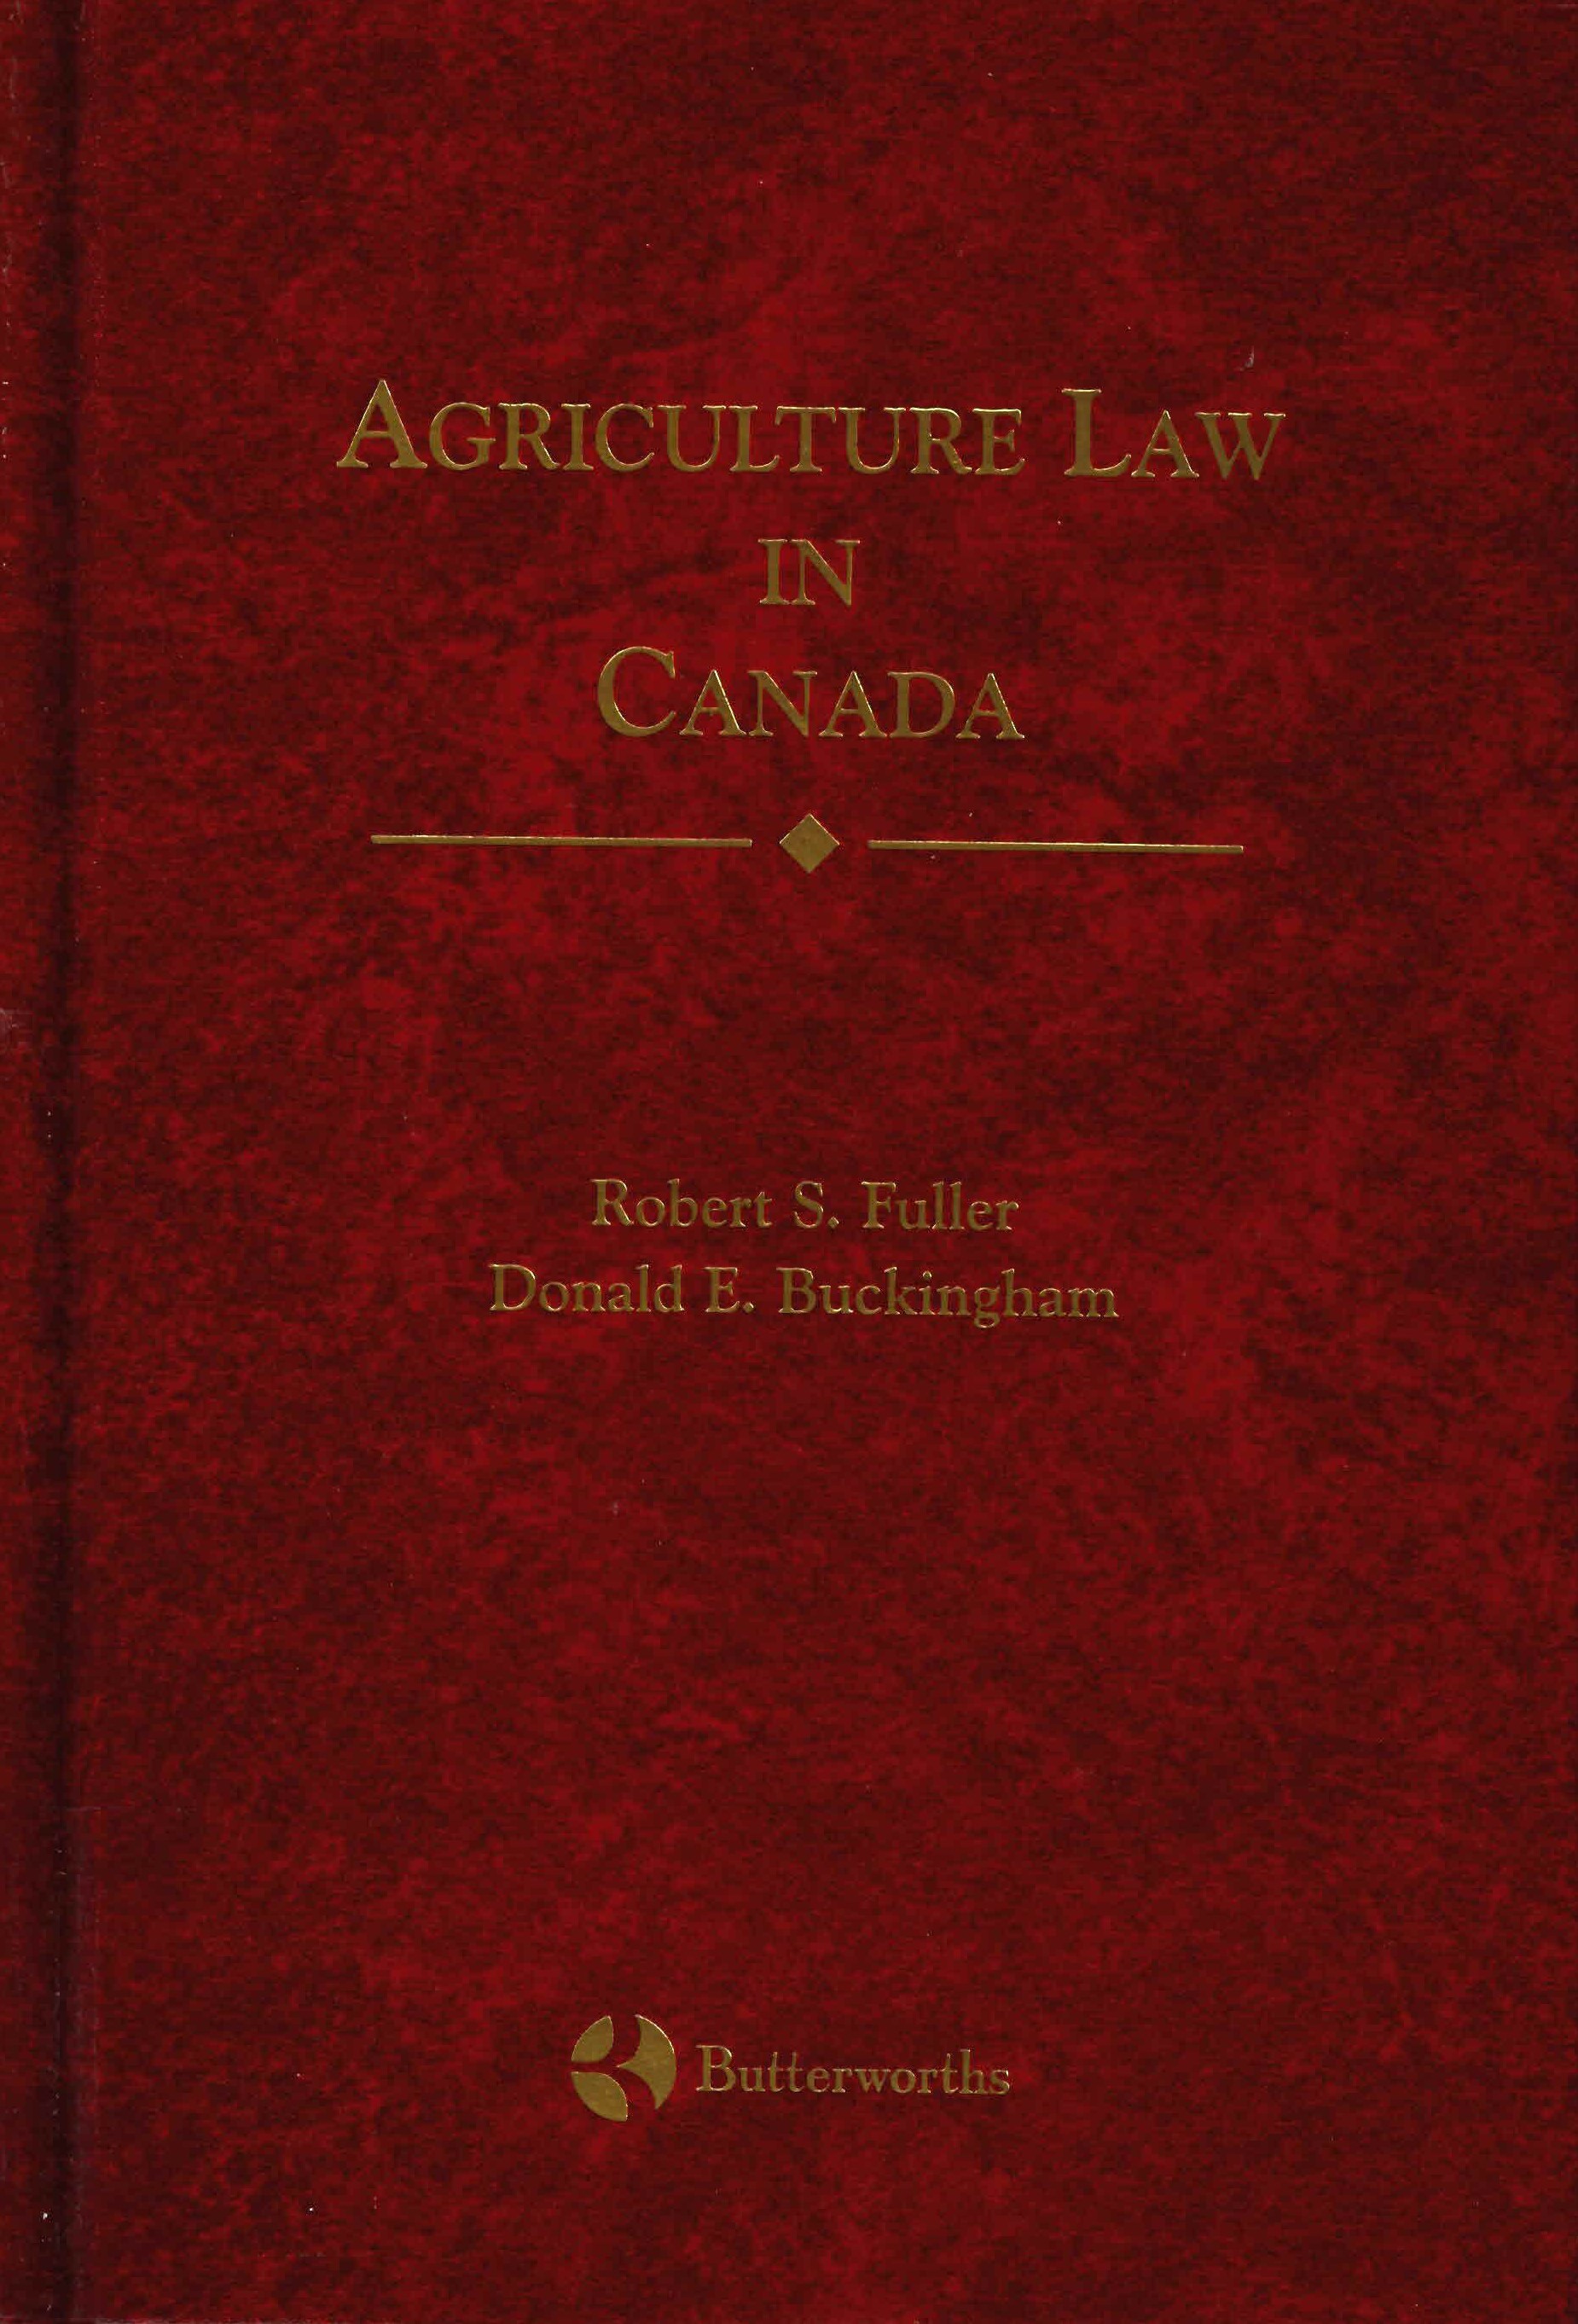 Agriculture law in Canada